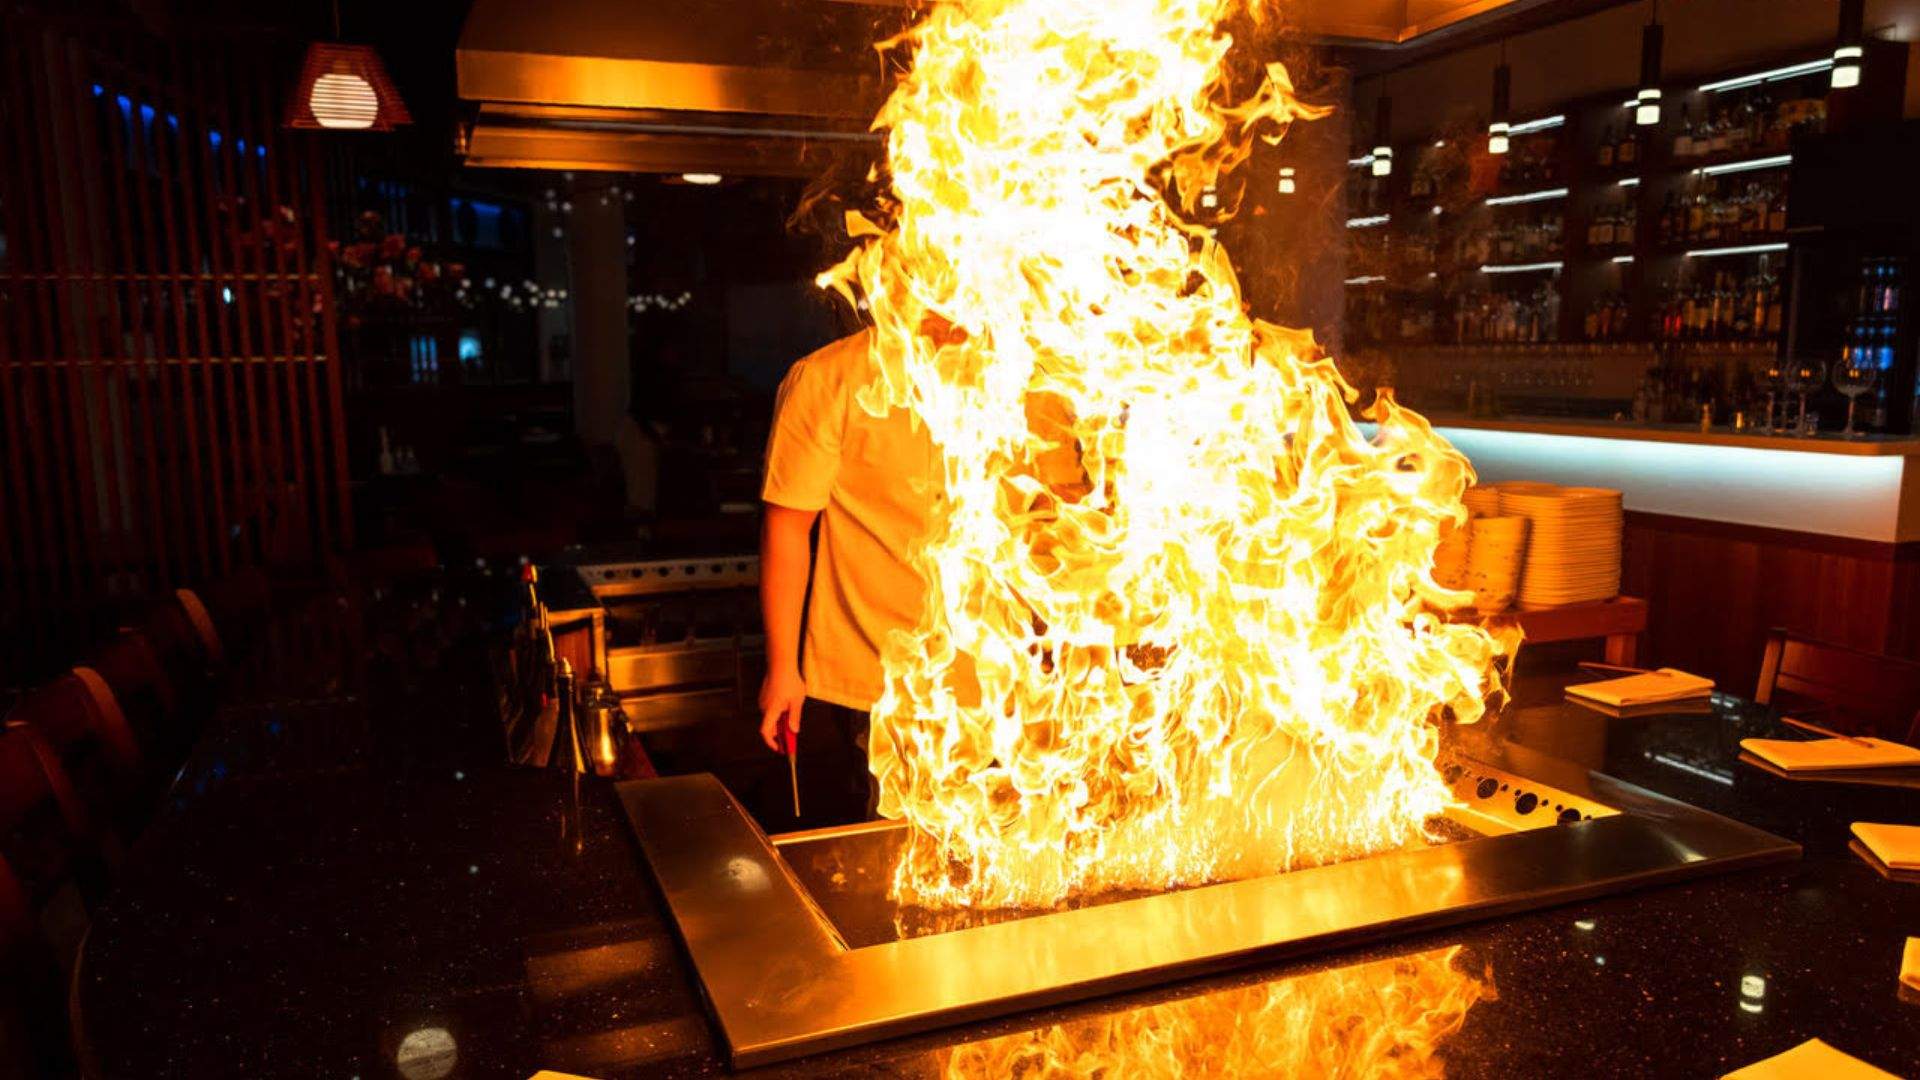 Huge flames coming off the teppanyaki grill at Oyama - one of the best Japanese restaurants in Brisbane.